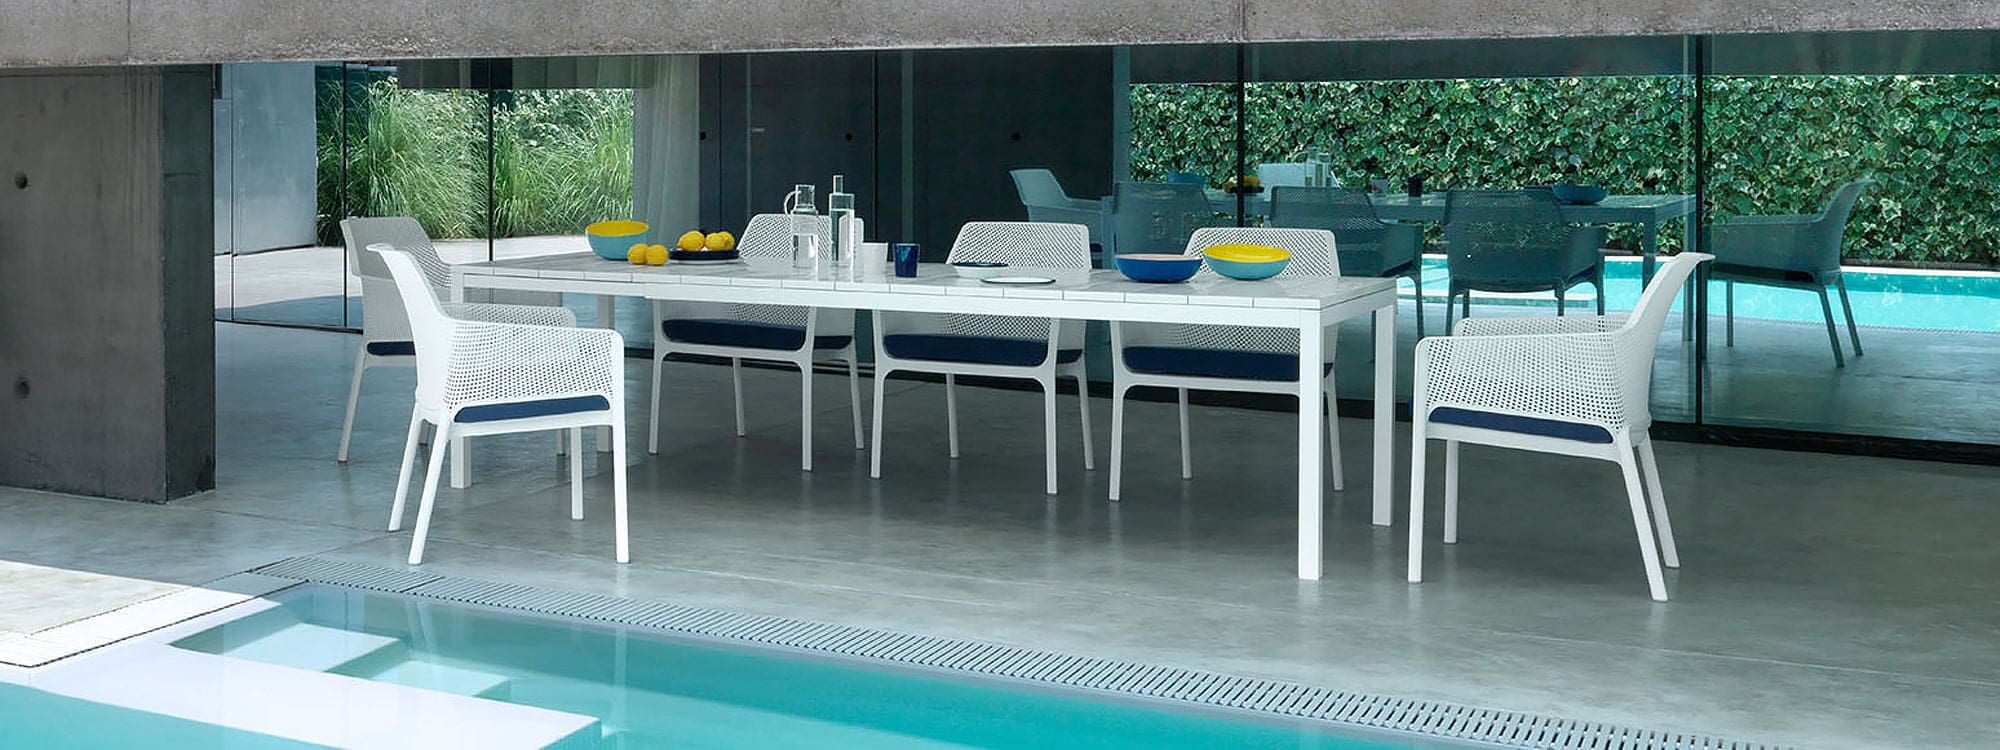 Image of Nardi Net white garden armchairs and Rio extending dining table on poolside